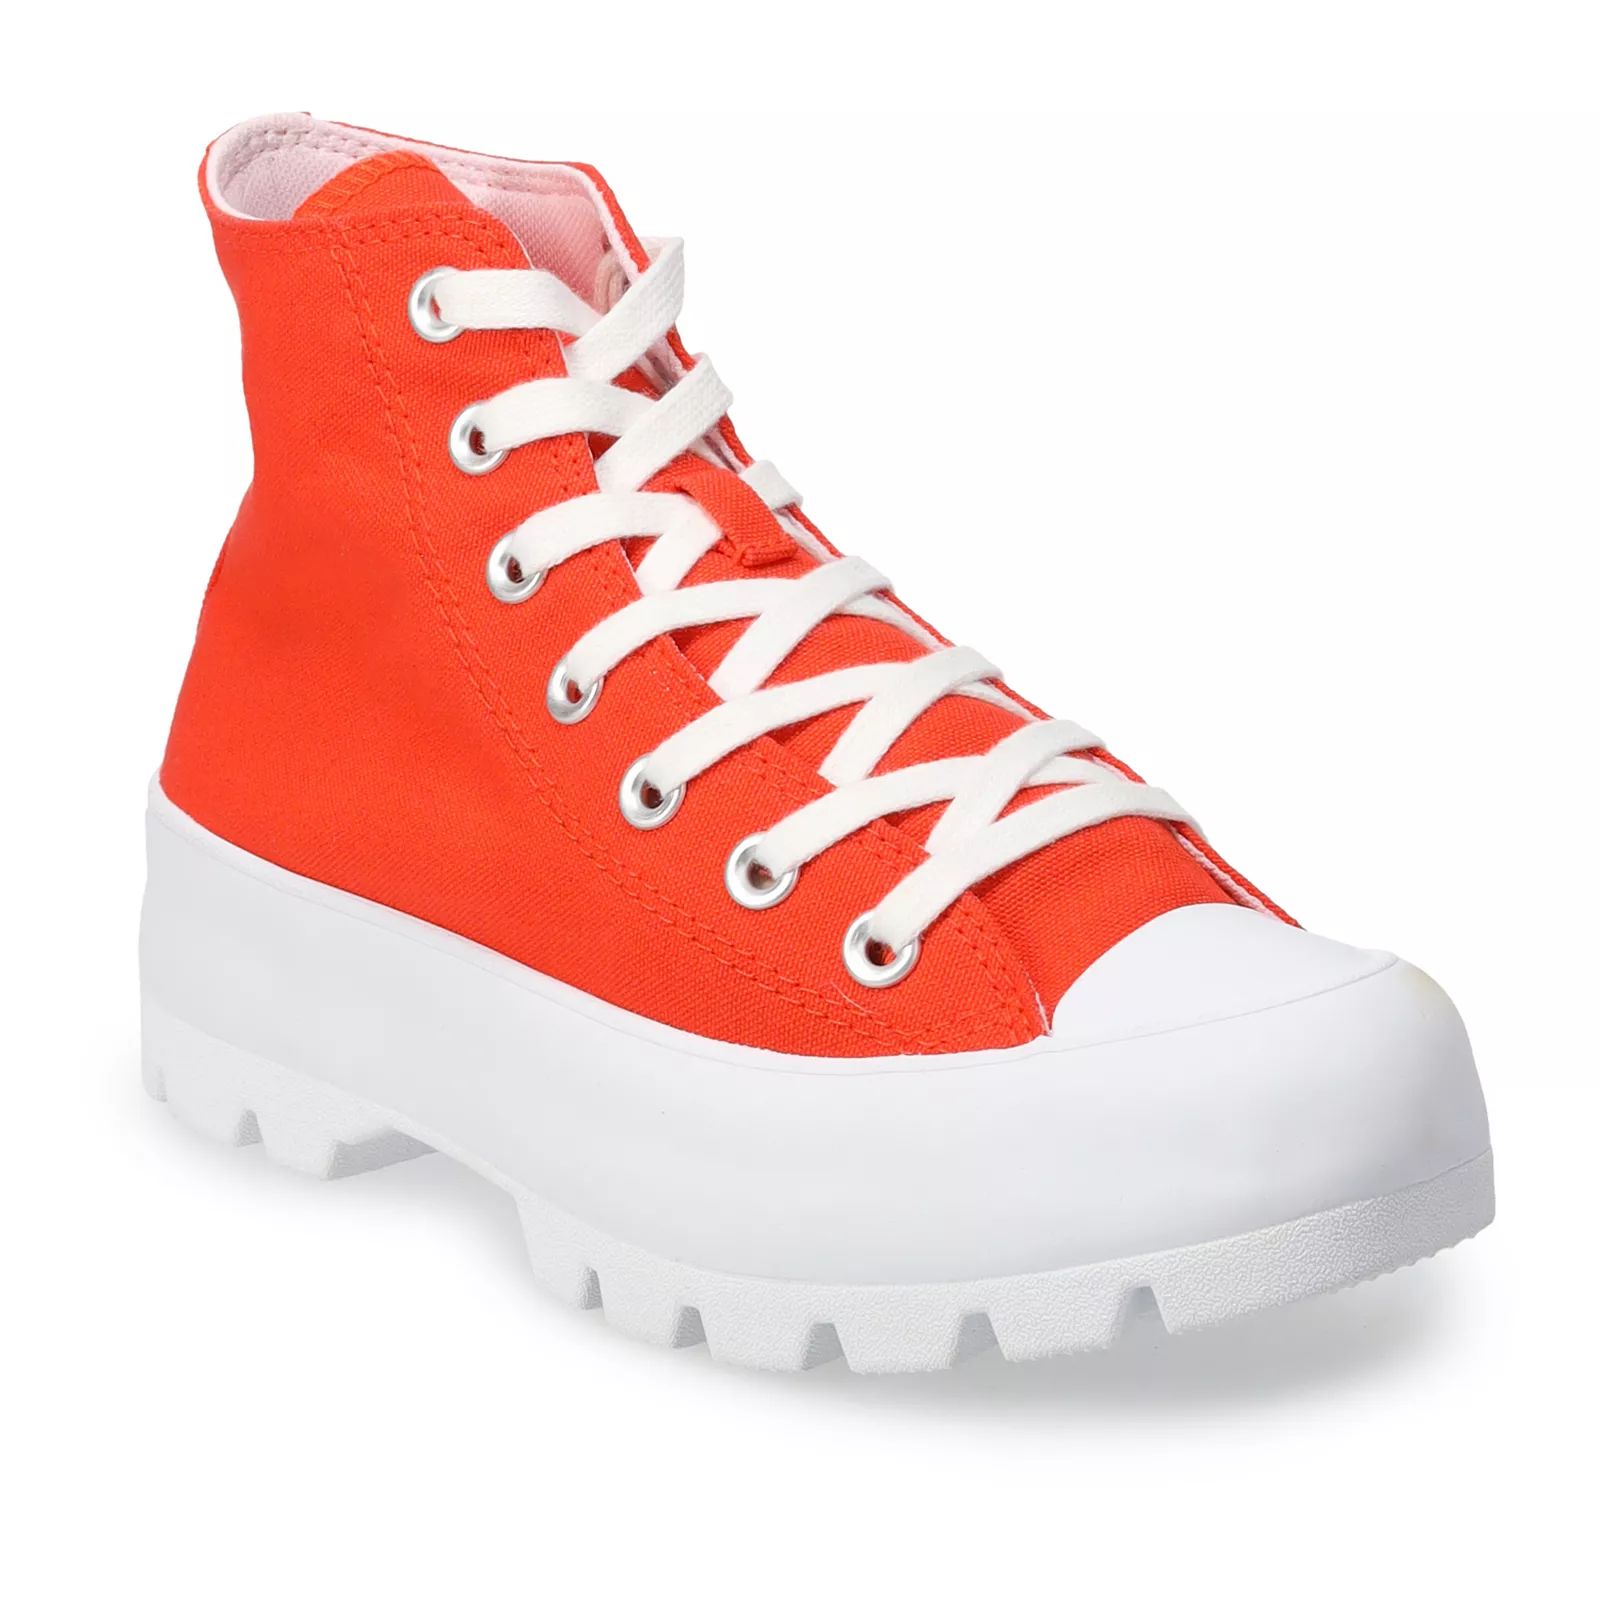 Women's Converse Chuck Taylor All Star Lugged High-Top Sneakers, Size: 7, Brt Orange | Kohl's